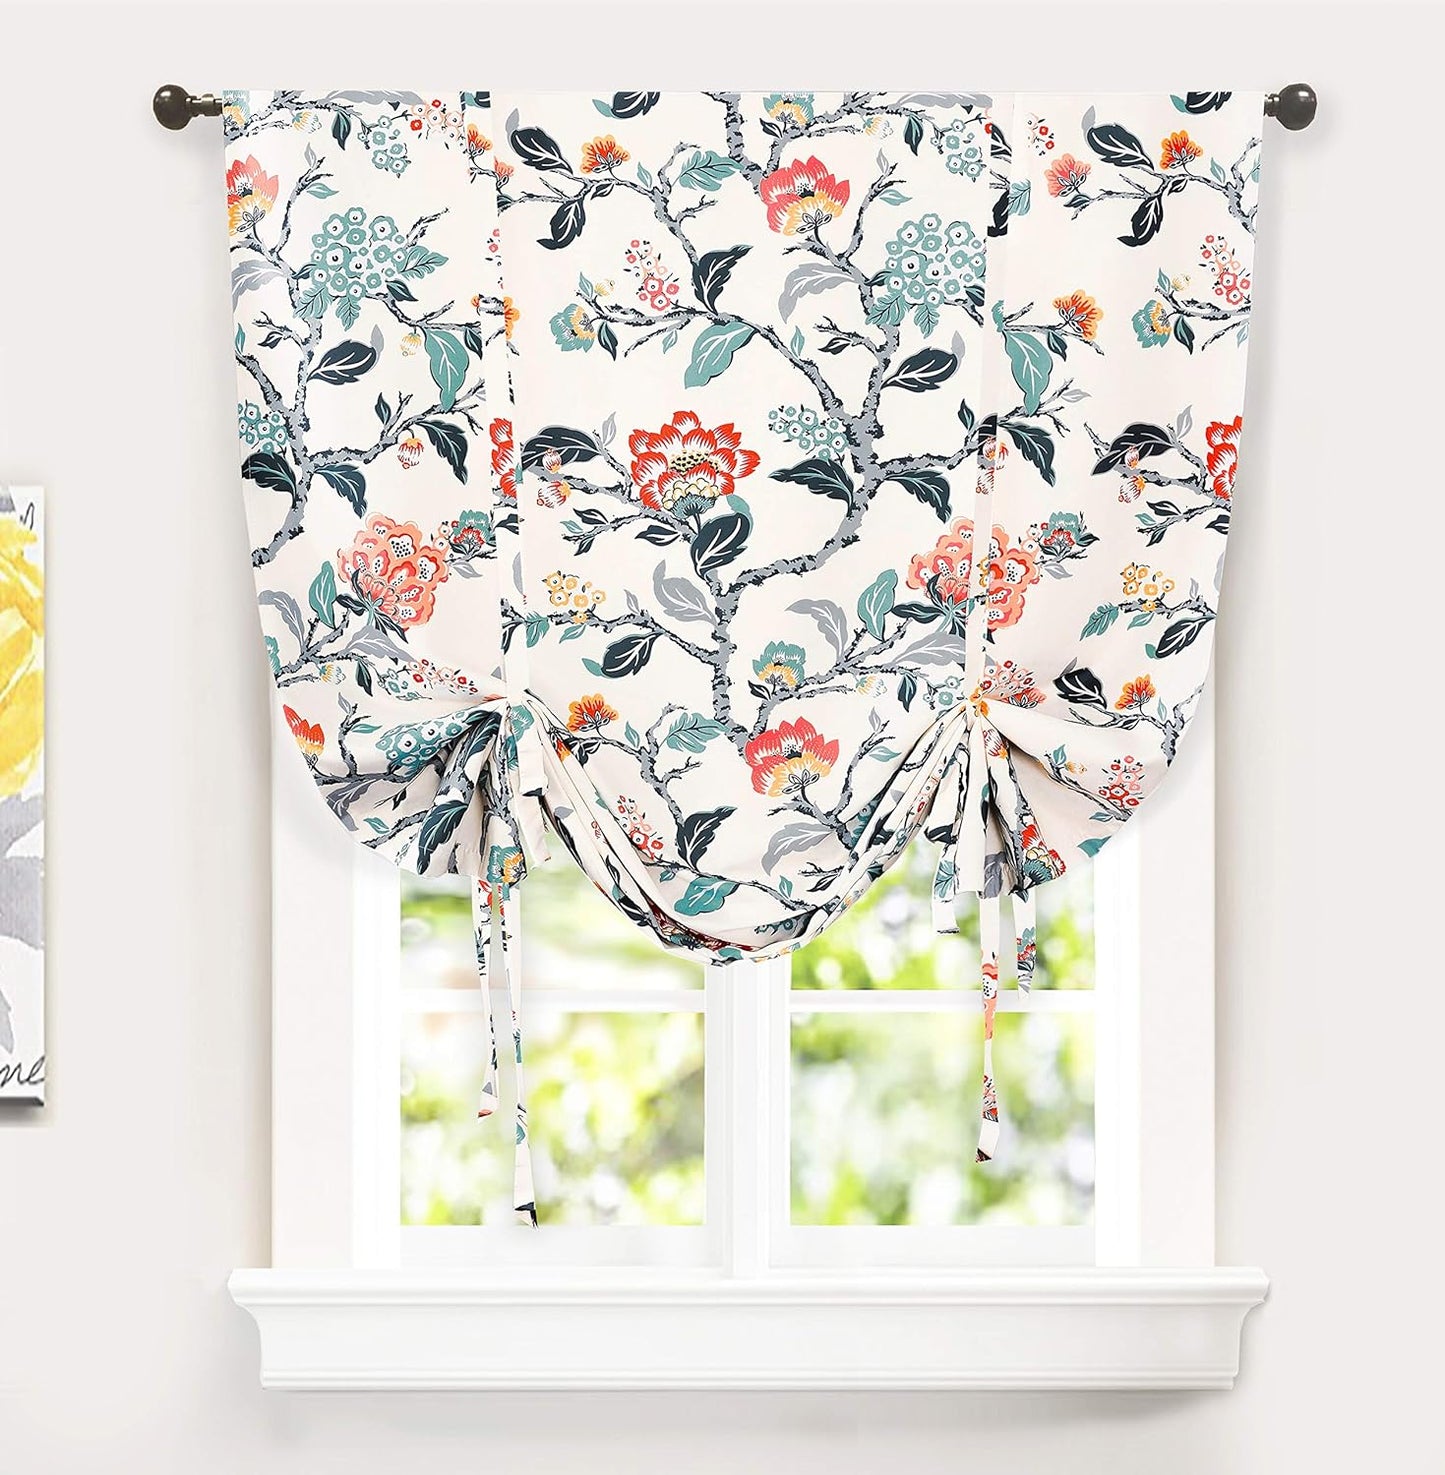 Driftaway Ada Botanical Print Lined Flower Leaf Tie up Curtain Thermal Insulated Privacy Blackout Window Adjustable Balloon Curtain Shade Rod Pocket Single 39 Inch by 55 Inch Ivory Orange Teal  DriftAway 1 45"X63" 